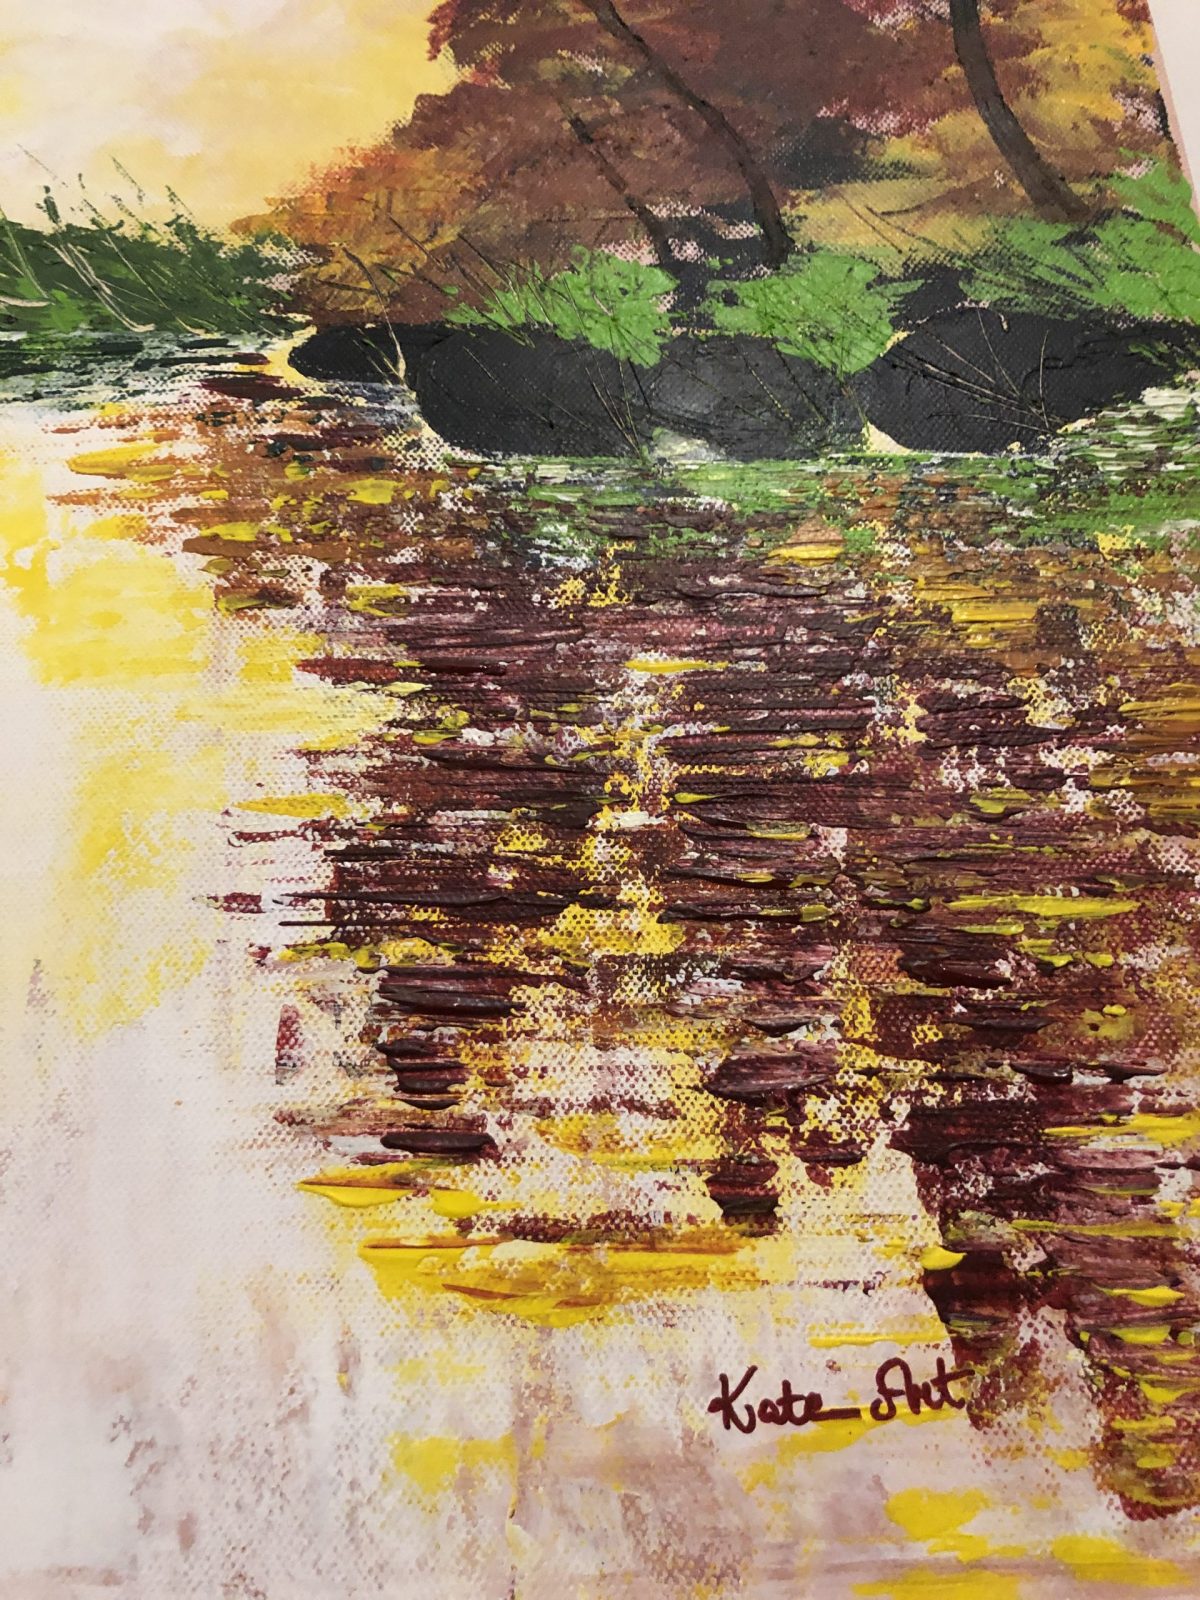 The golden autumn at the lake of Kate_Art, close-up on the bottom right of the painting